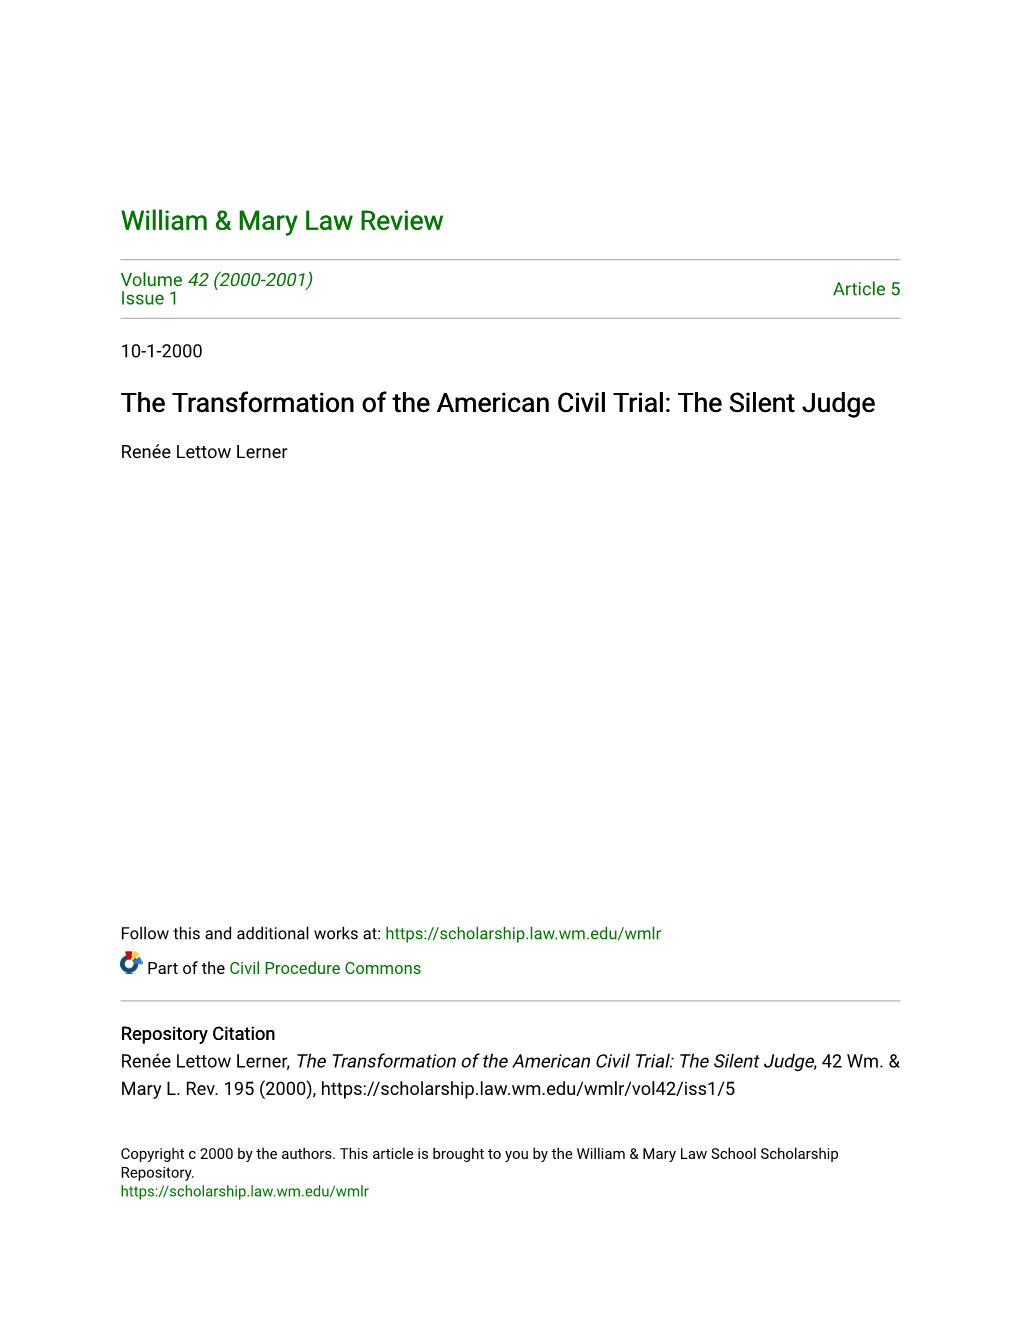 The Transformation of the American Civil Trial: the Silent Judge